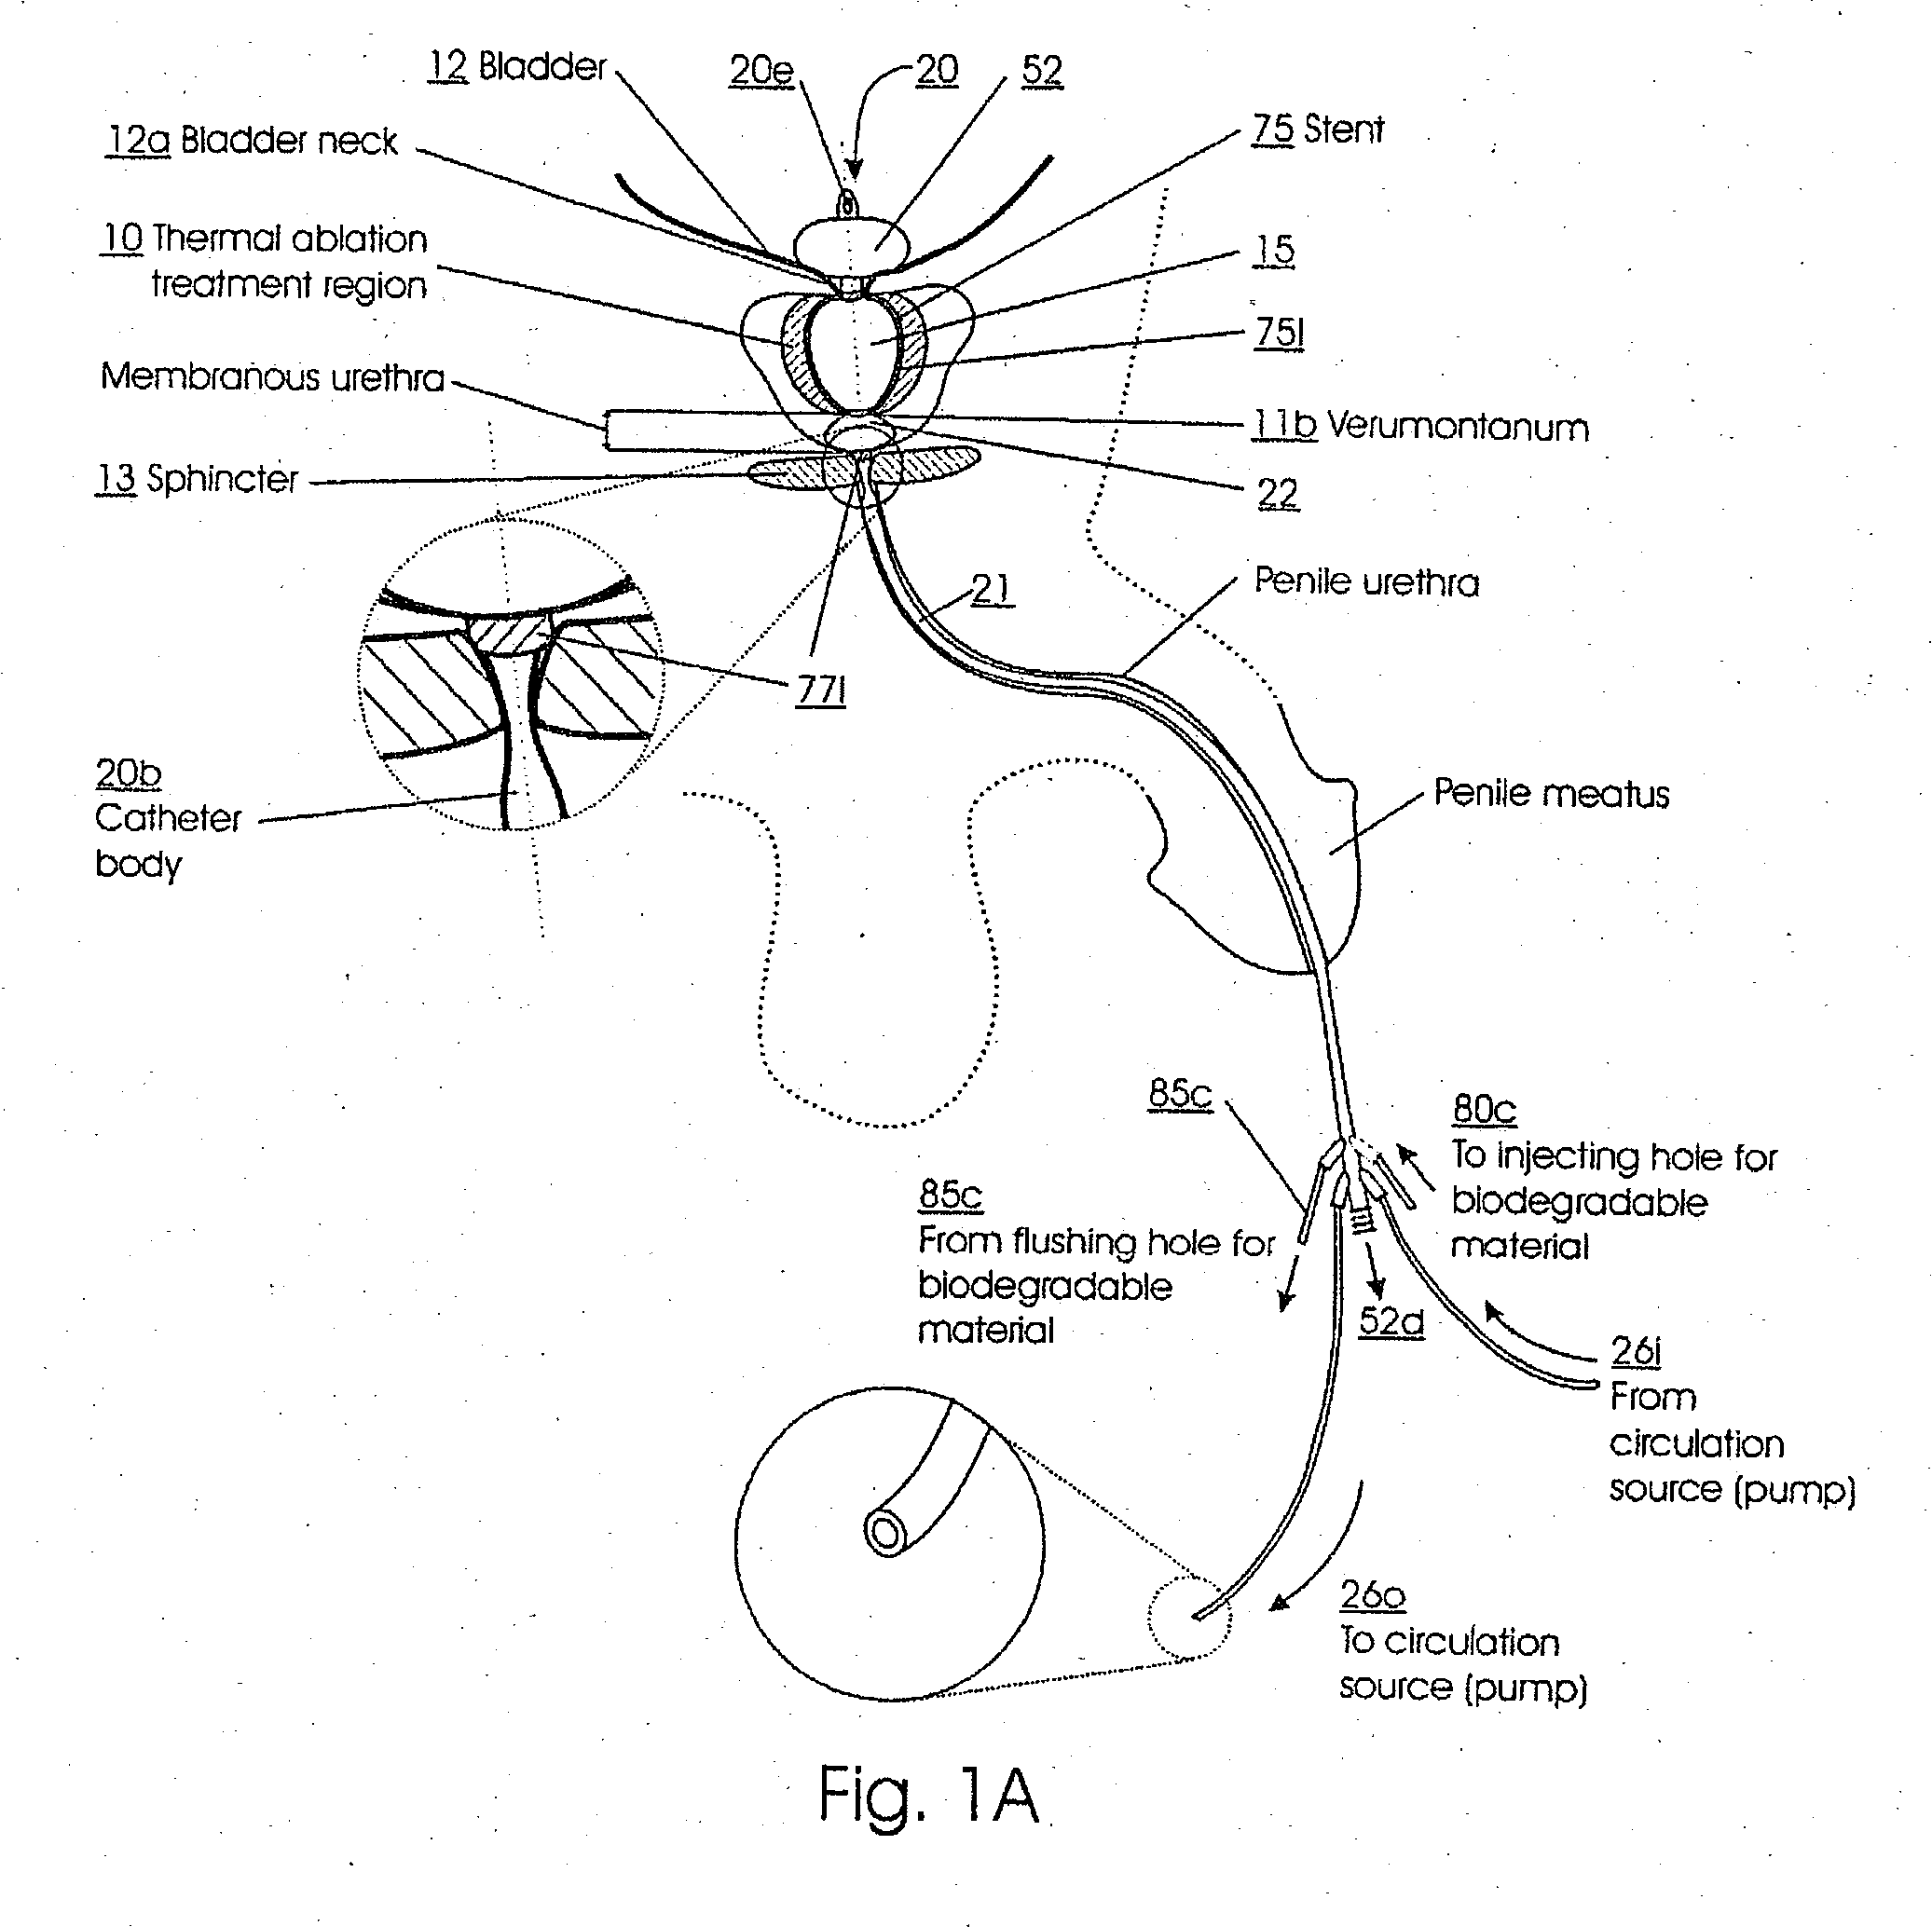 Method for treating the prostate and inhibiting obstruction of the prostatic urethra using biodegradable stents